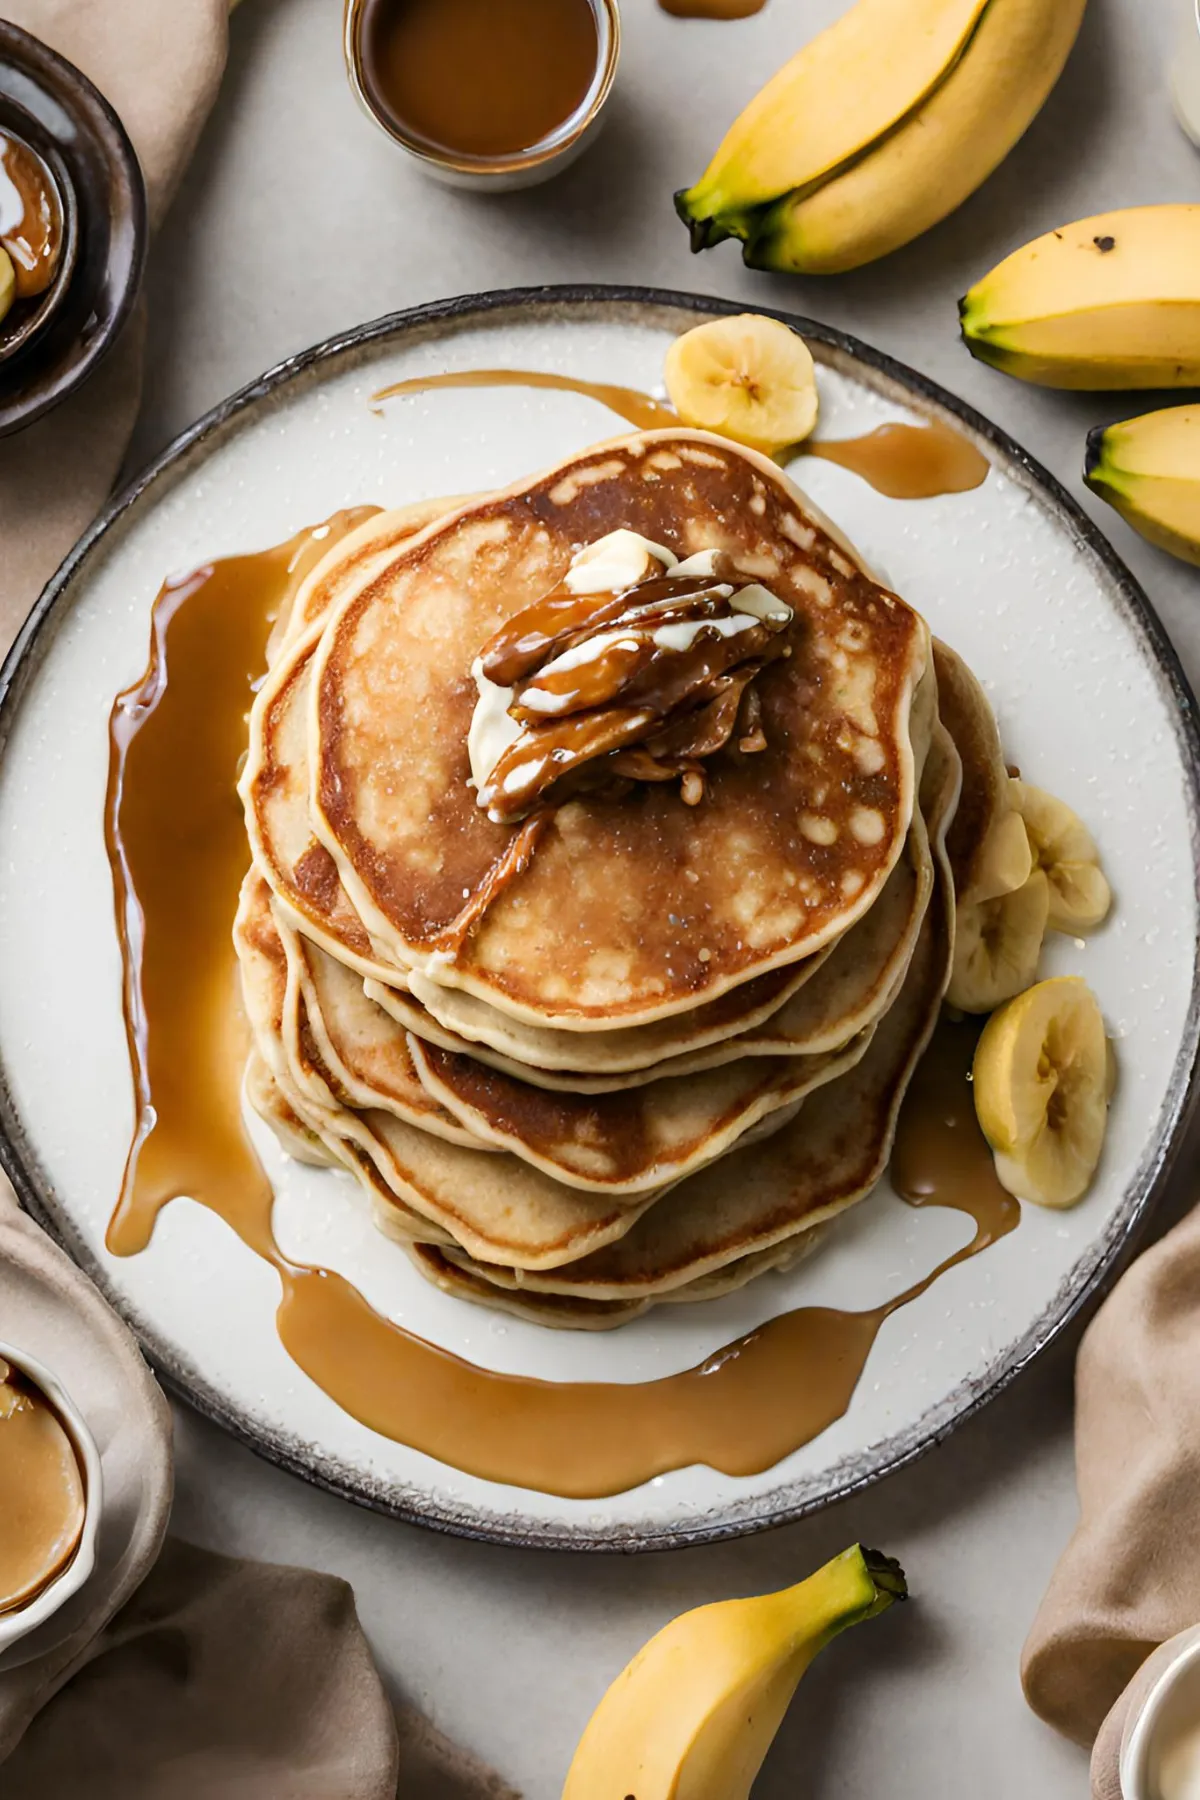 Additional Insights Enhancing Your Banana Foster Pancakes Experience